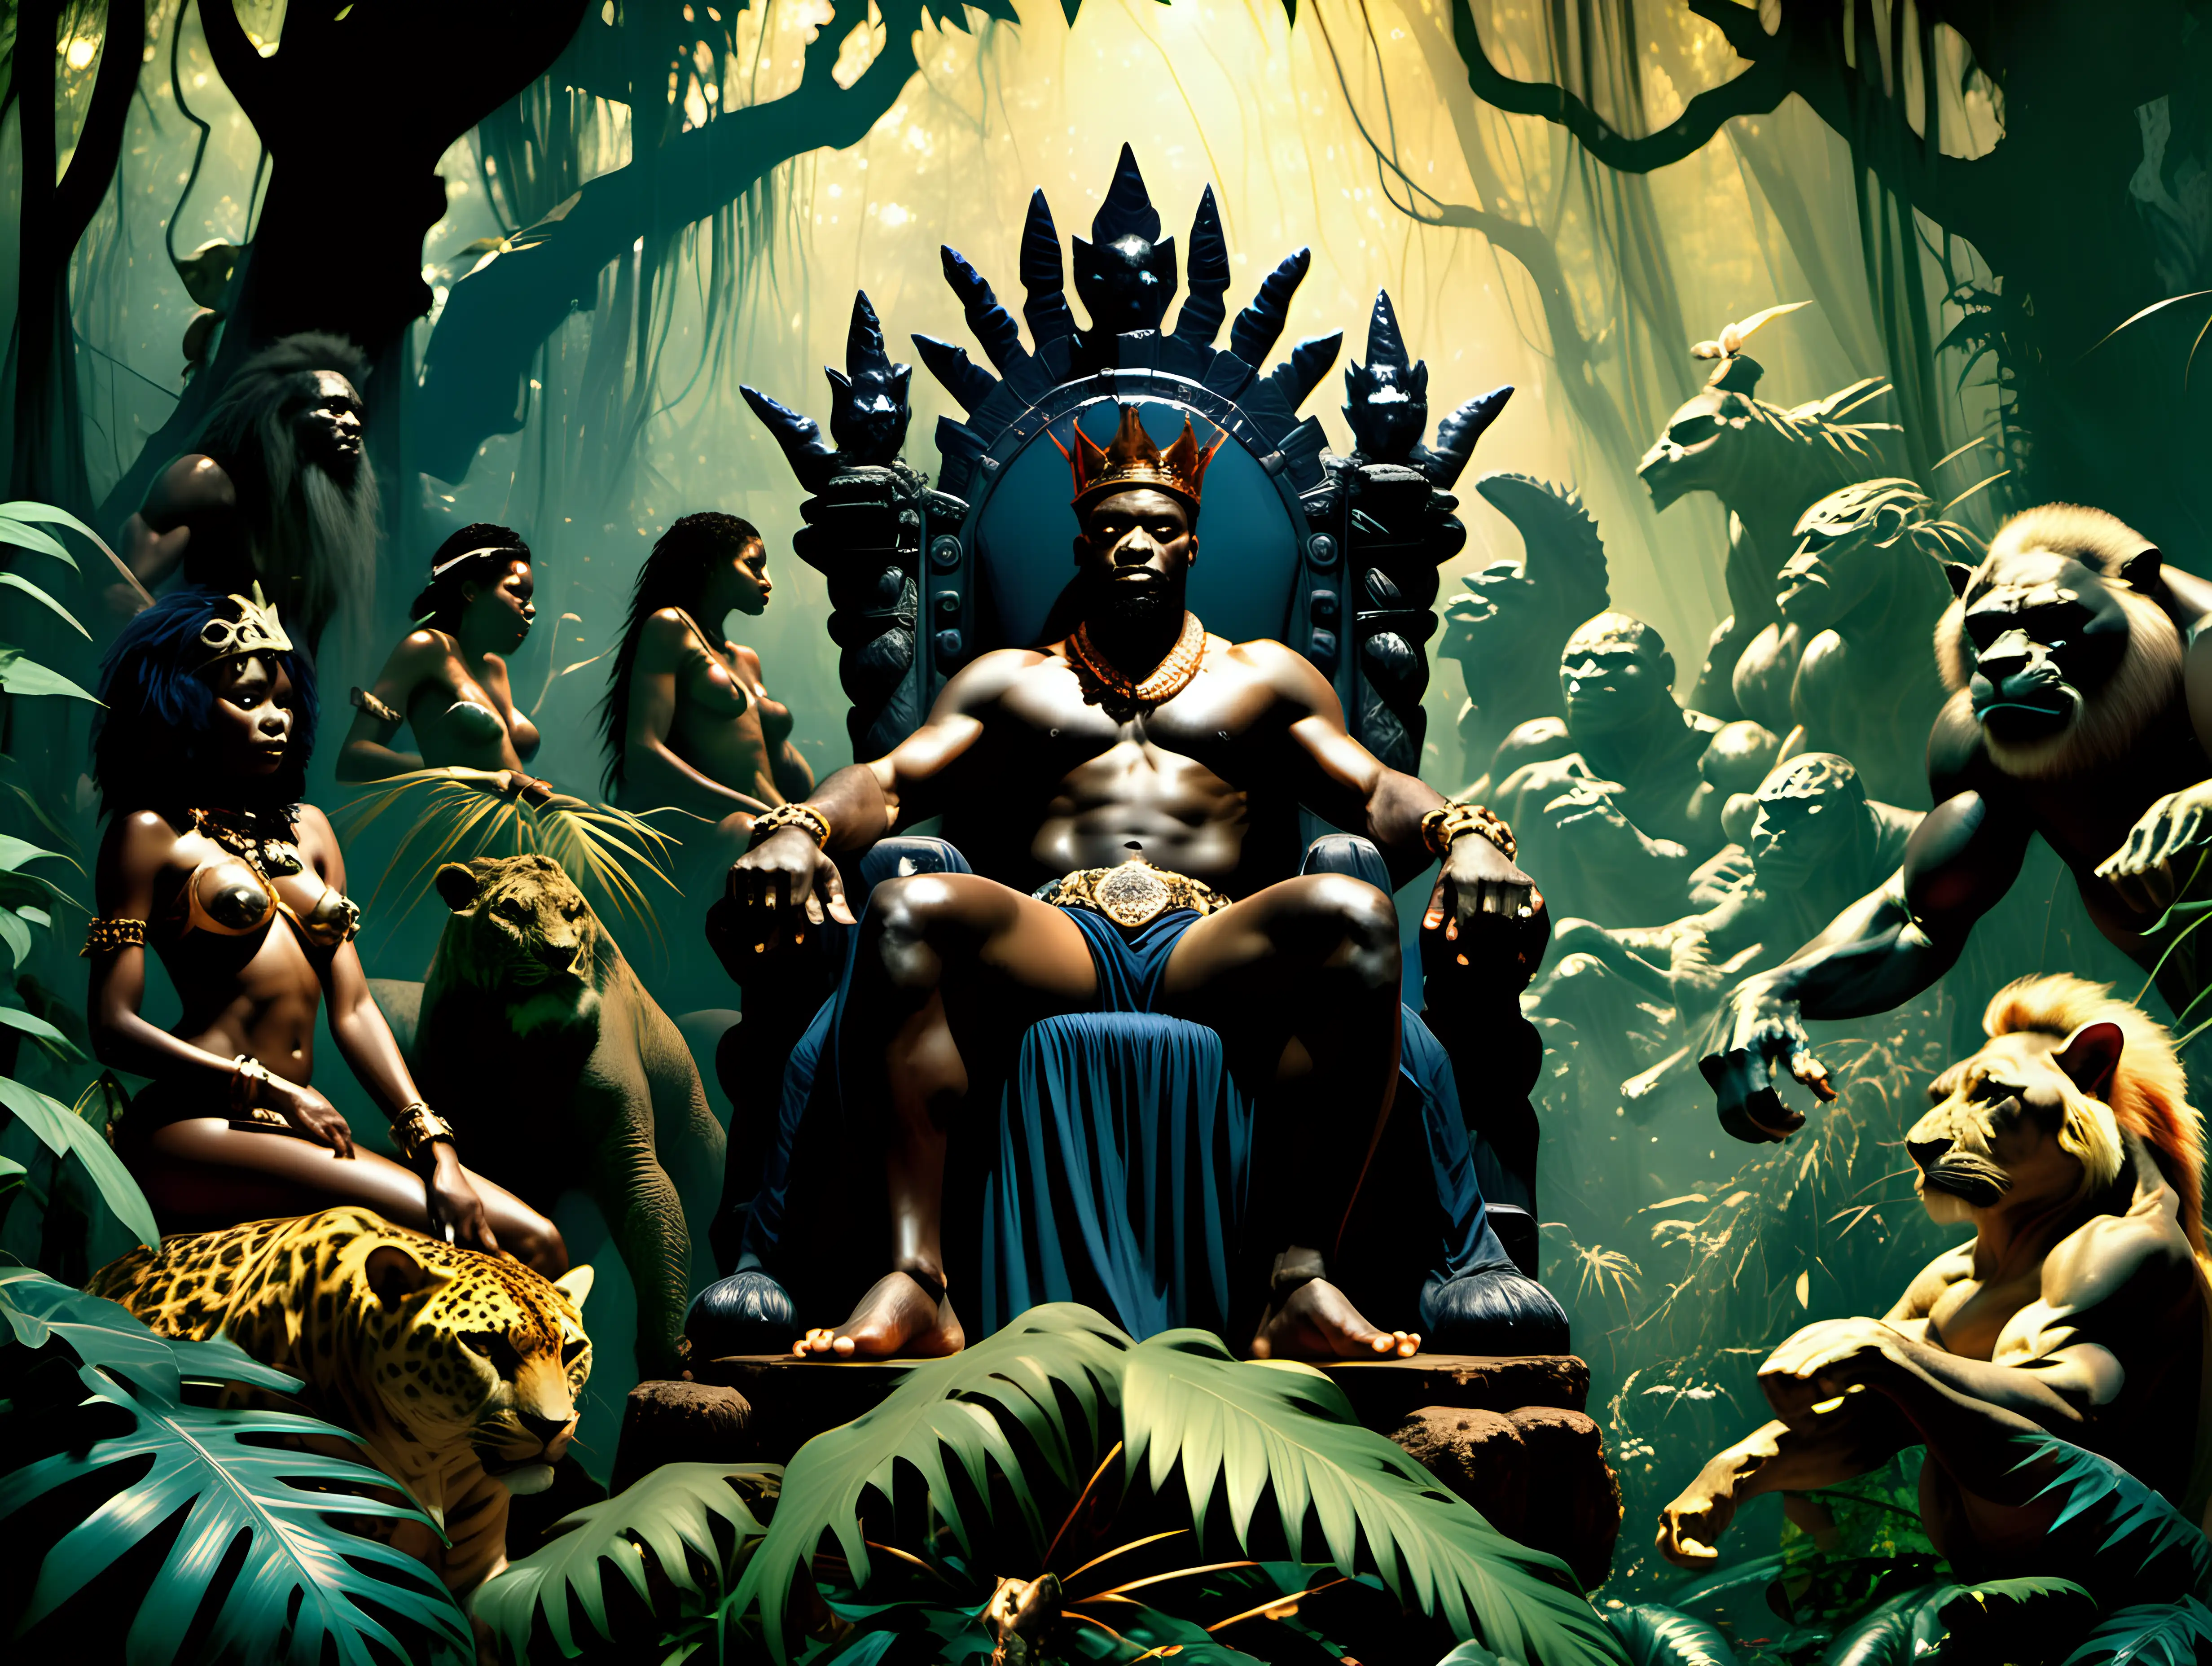 African King Enthroned in Enchanted Forest with Jungle Creatures Photo Realistic Frank Frazetta Style